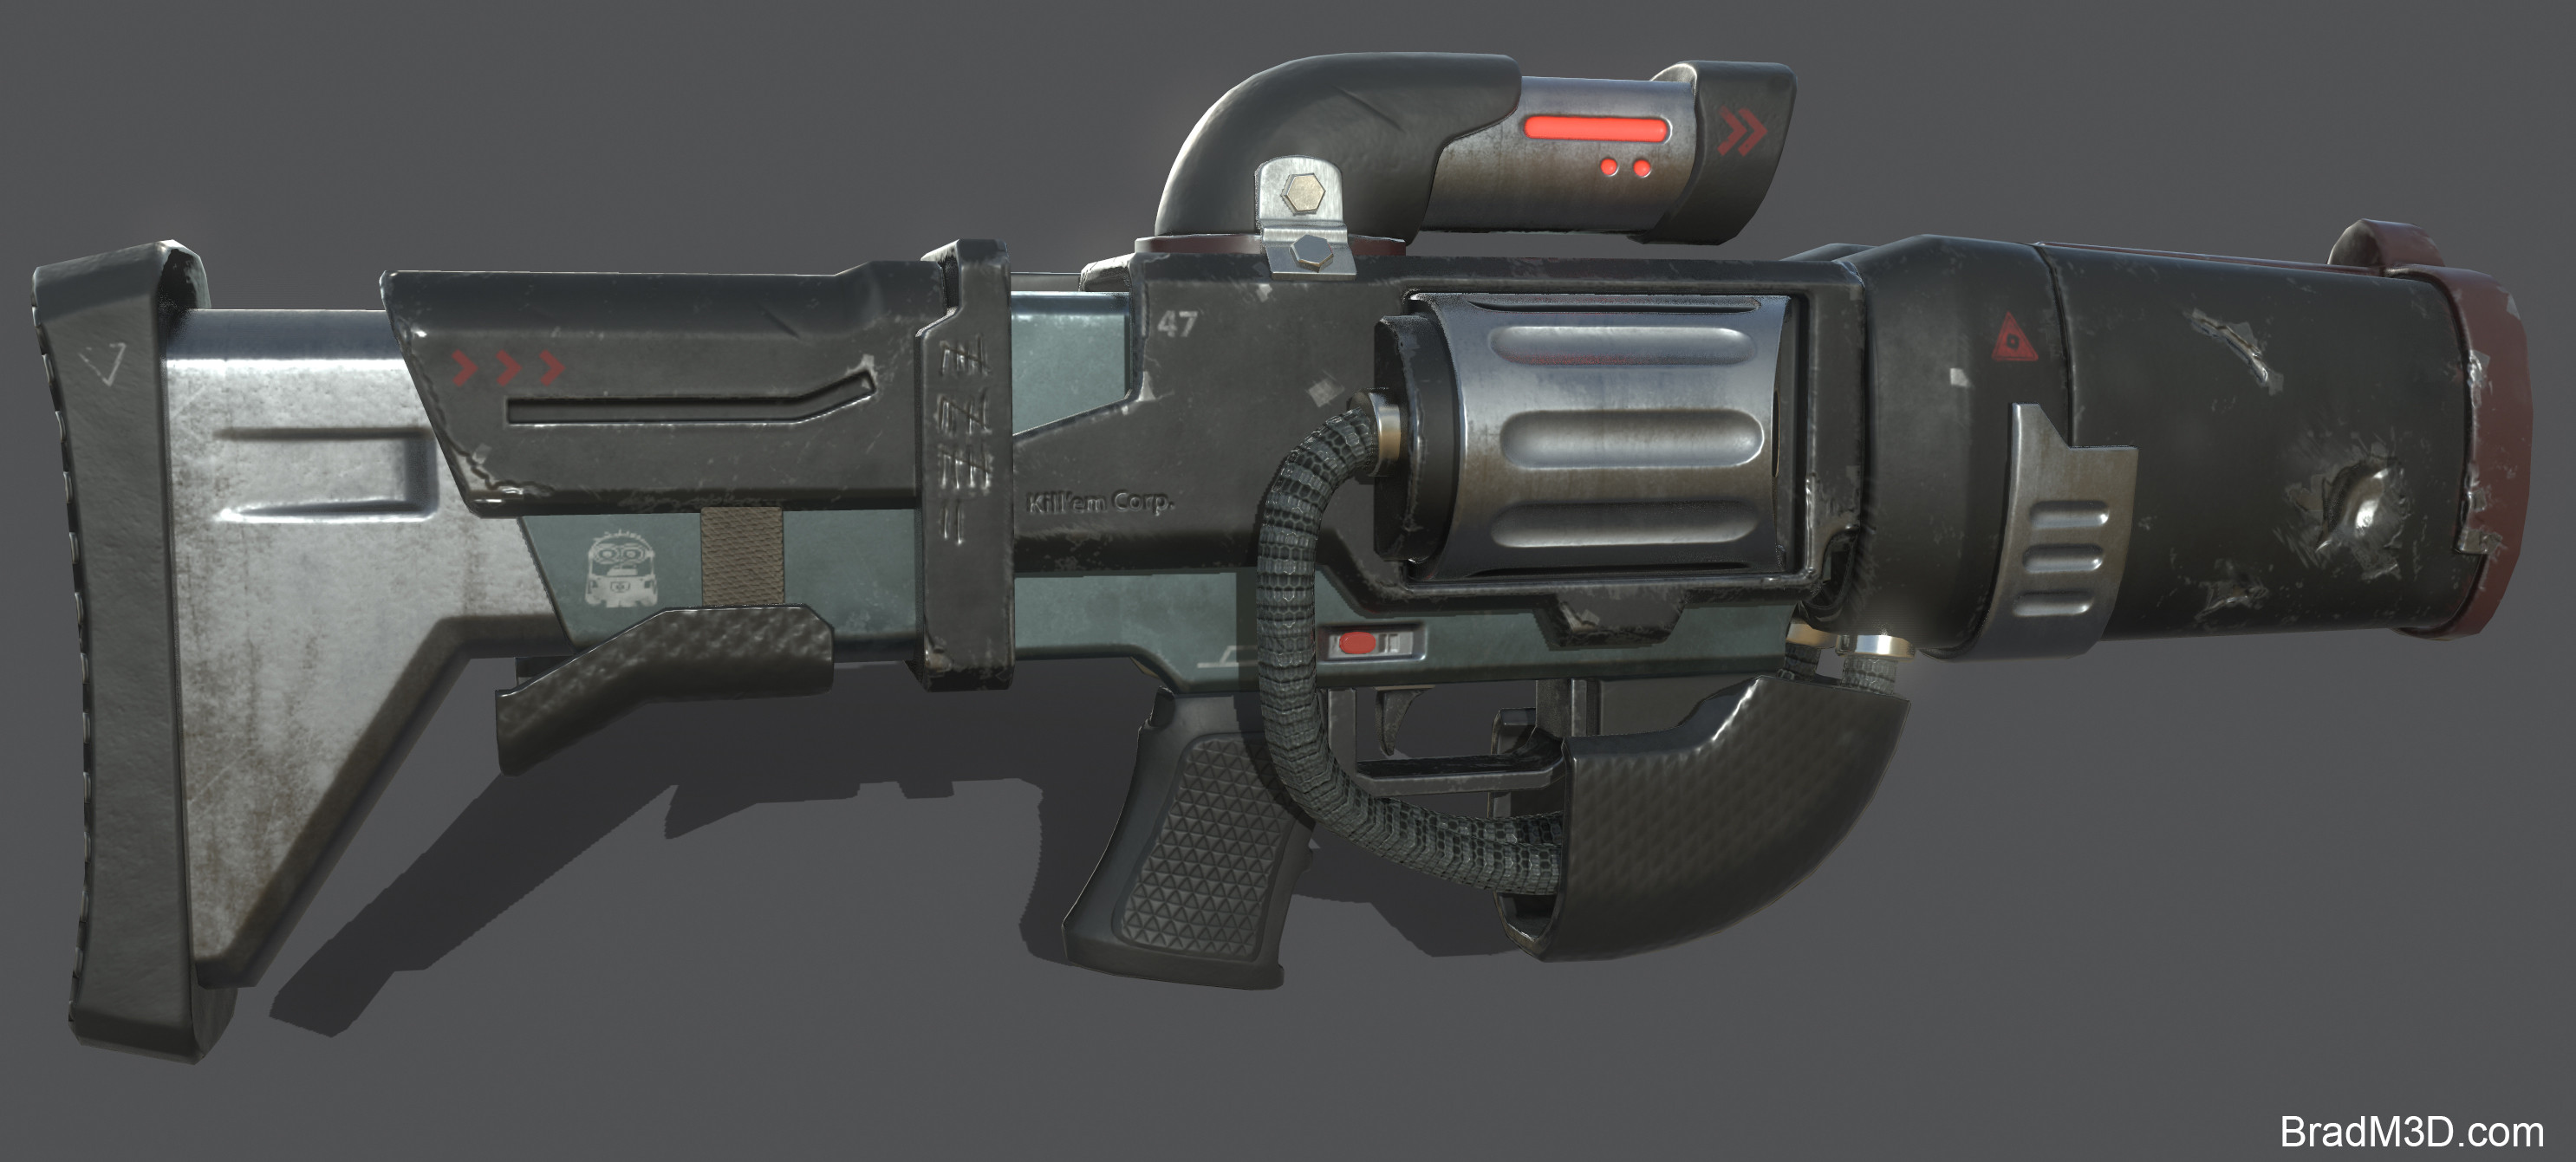 Marmoset: Screen Grab Gun_01
(Totally concepted by me).